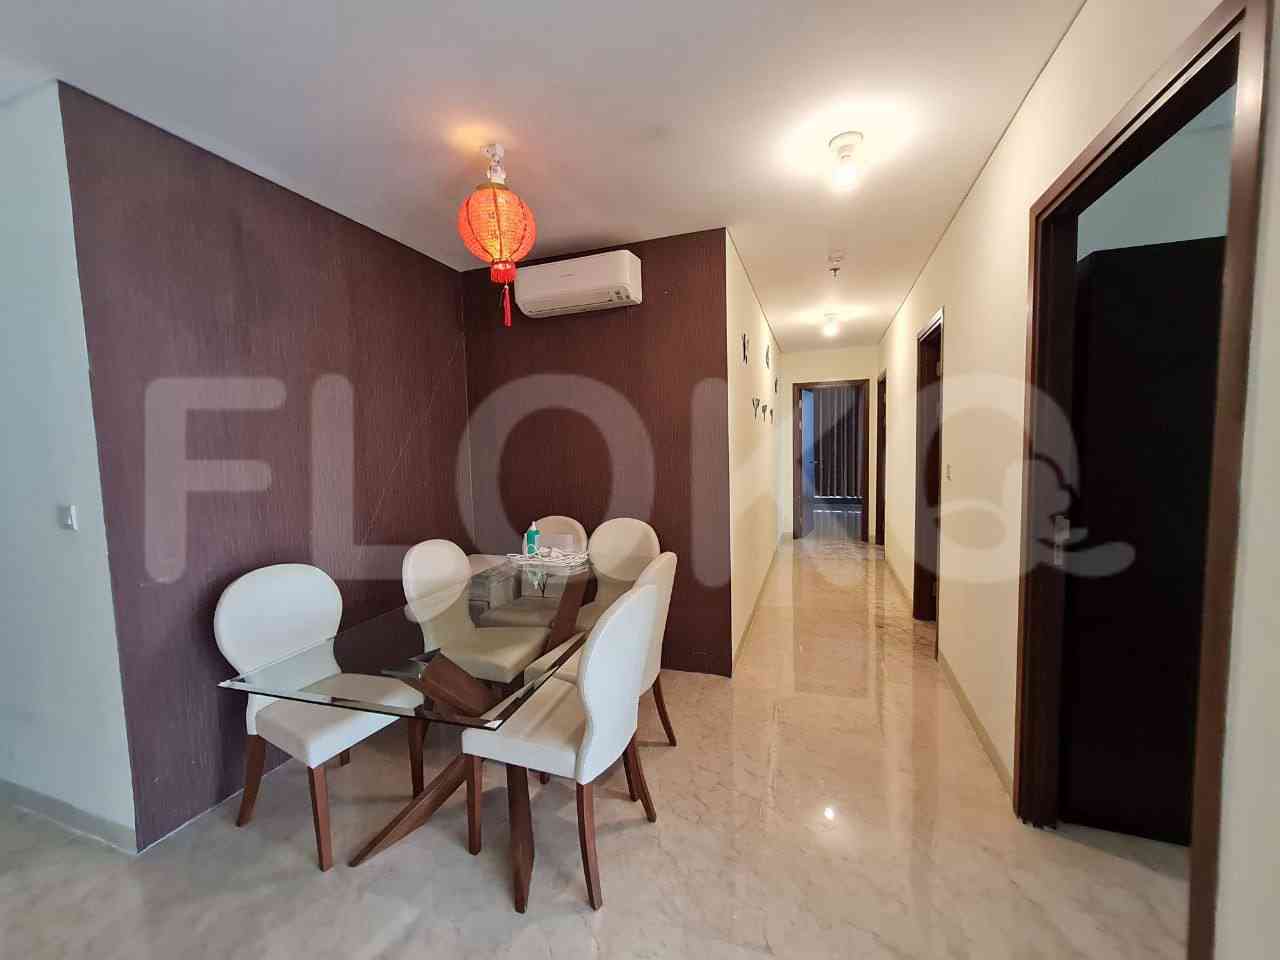 3 Bedroom on 6th Floor for Rent in Lavanue Apartment - fpad68 1